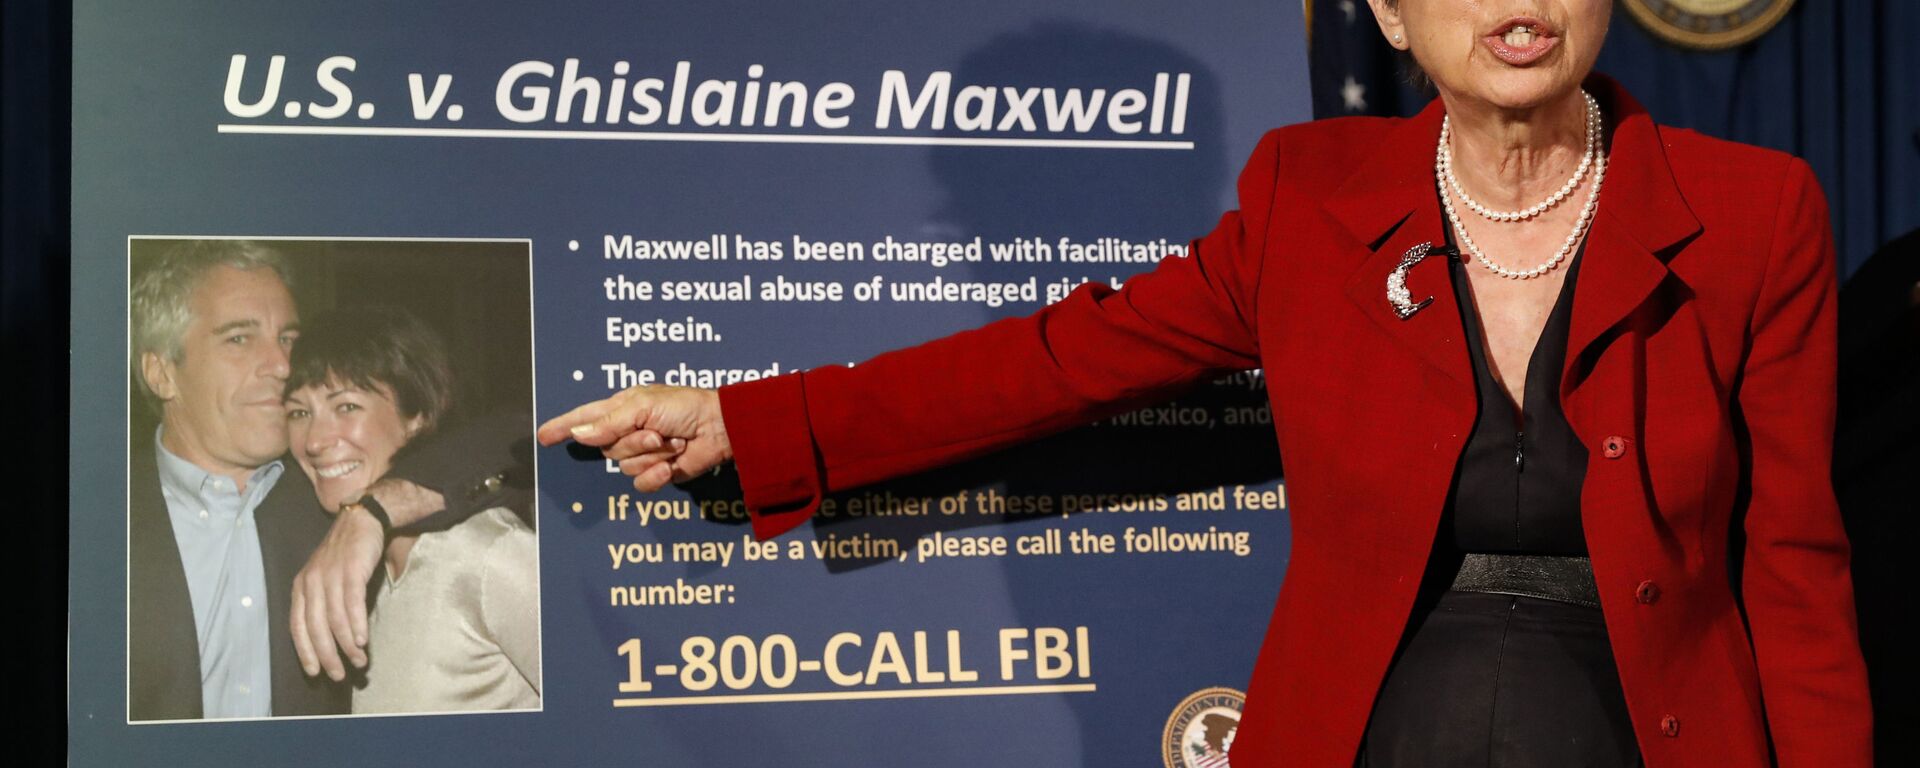  In this July 2, 2020 file photo, Audrey Strauss, Acting United States Attorney for the Southern District of New York, speaks during a news conference in New York, to announce charges against Ghislaine Maxwell for her alleged role in the sexual exploitation and abuse of multiple minor girls by Jeffrey Epstein - Sputnik International, 1920, 24.04.2021